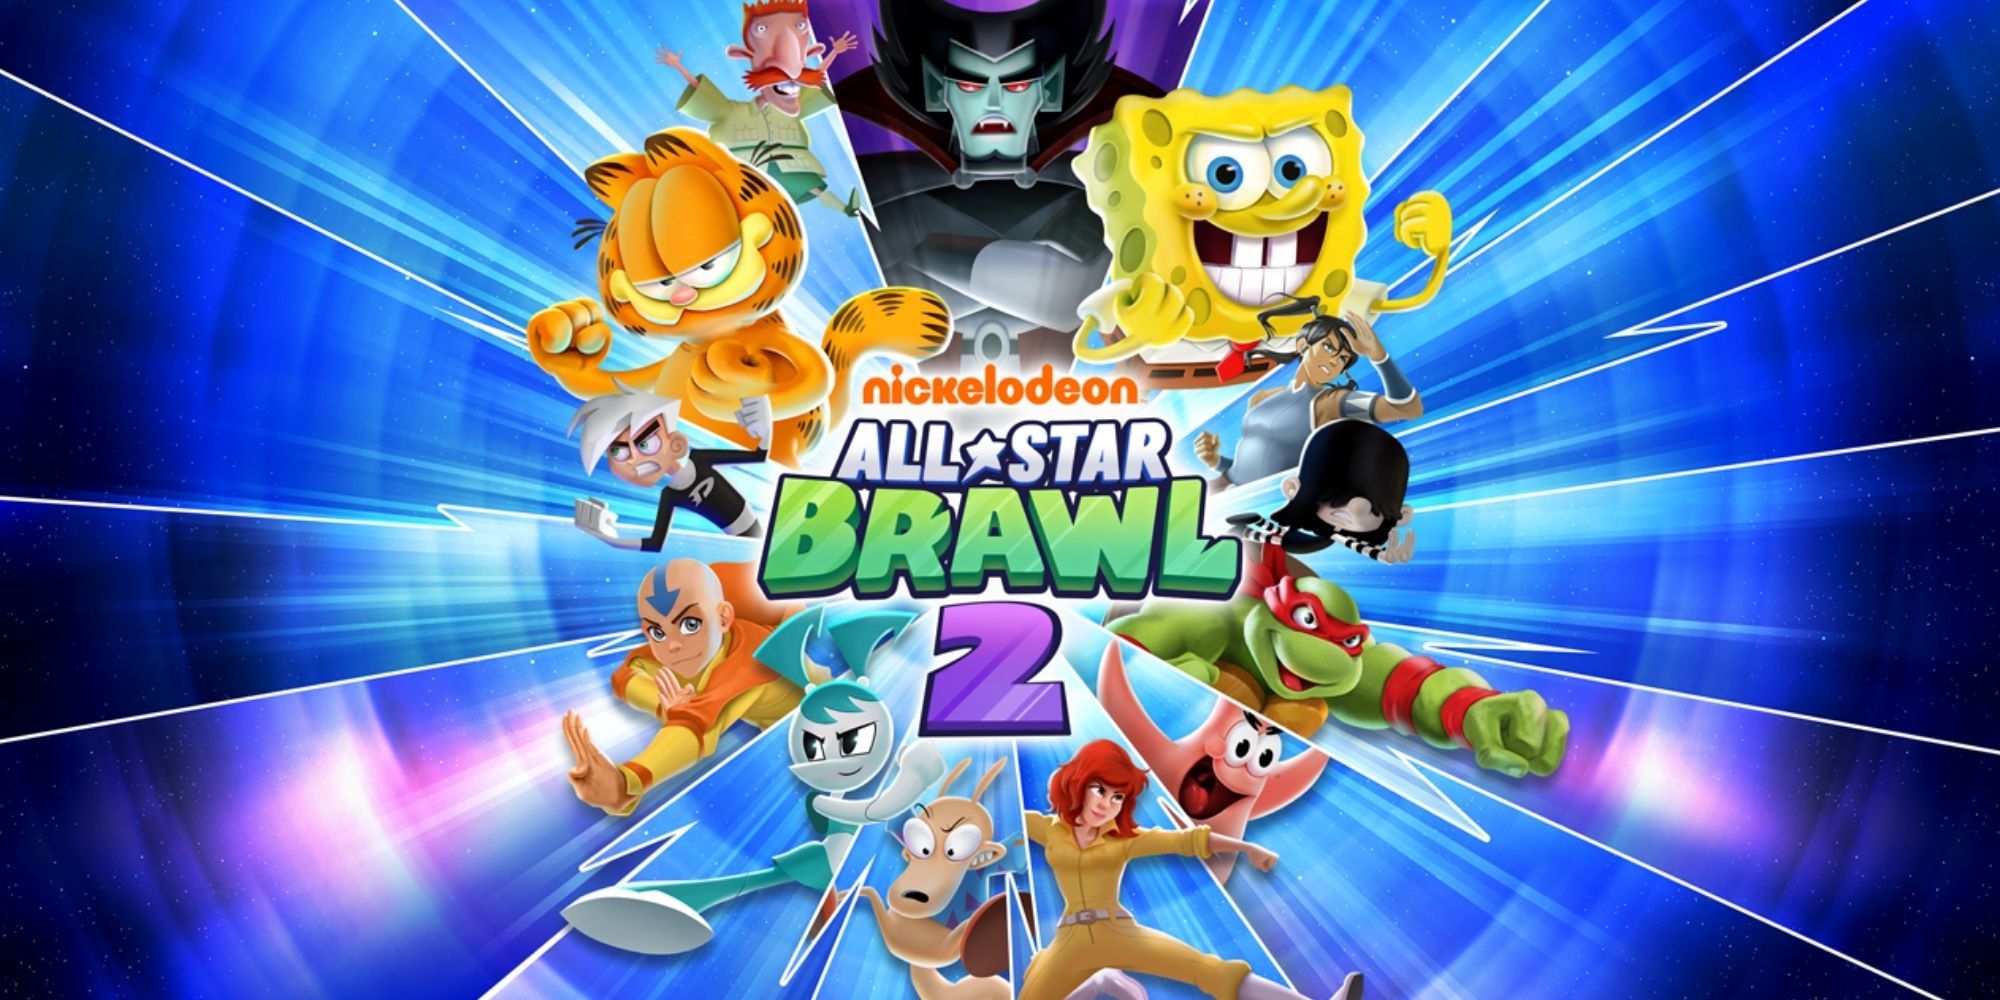 The cover art for Nickelodeon All-Star Brawl 2, showing cartoon characters like SpongeBob and Rocko.